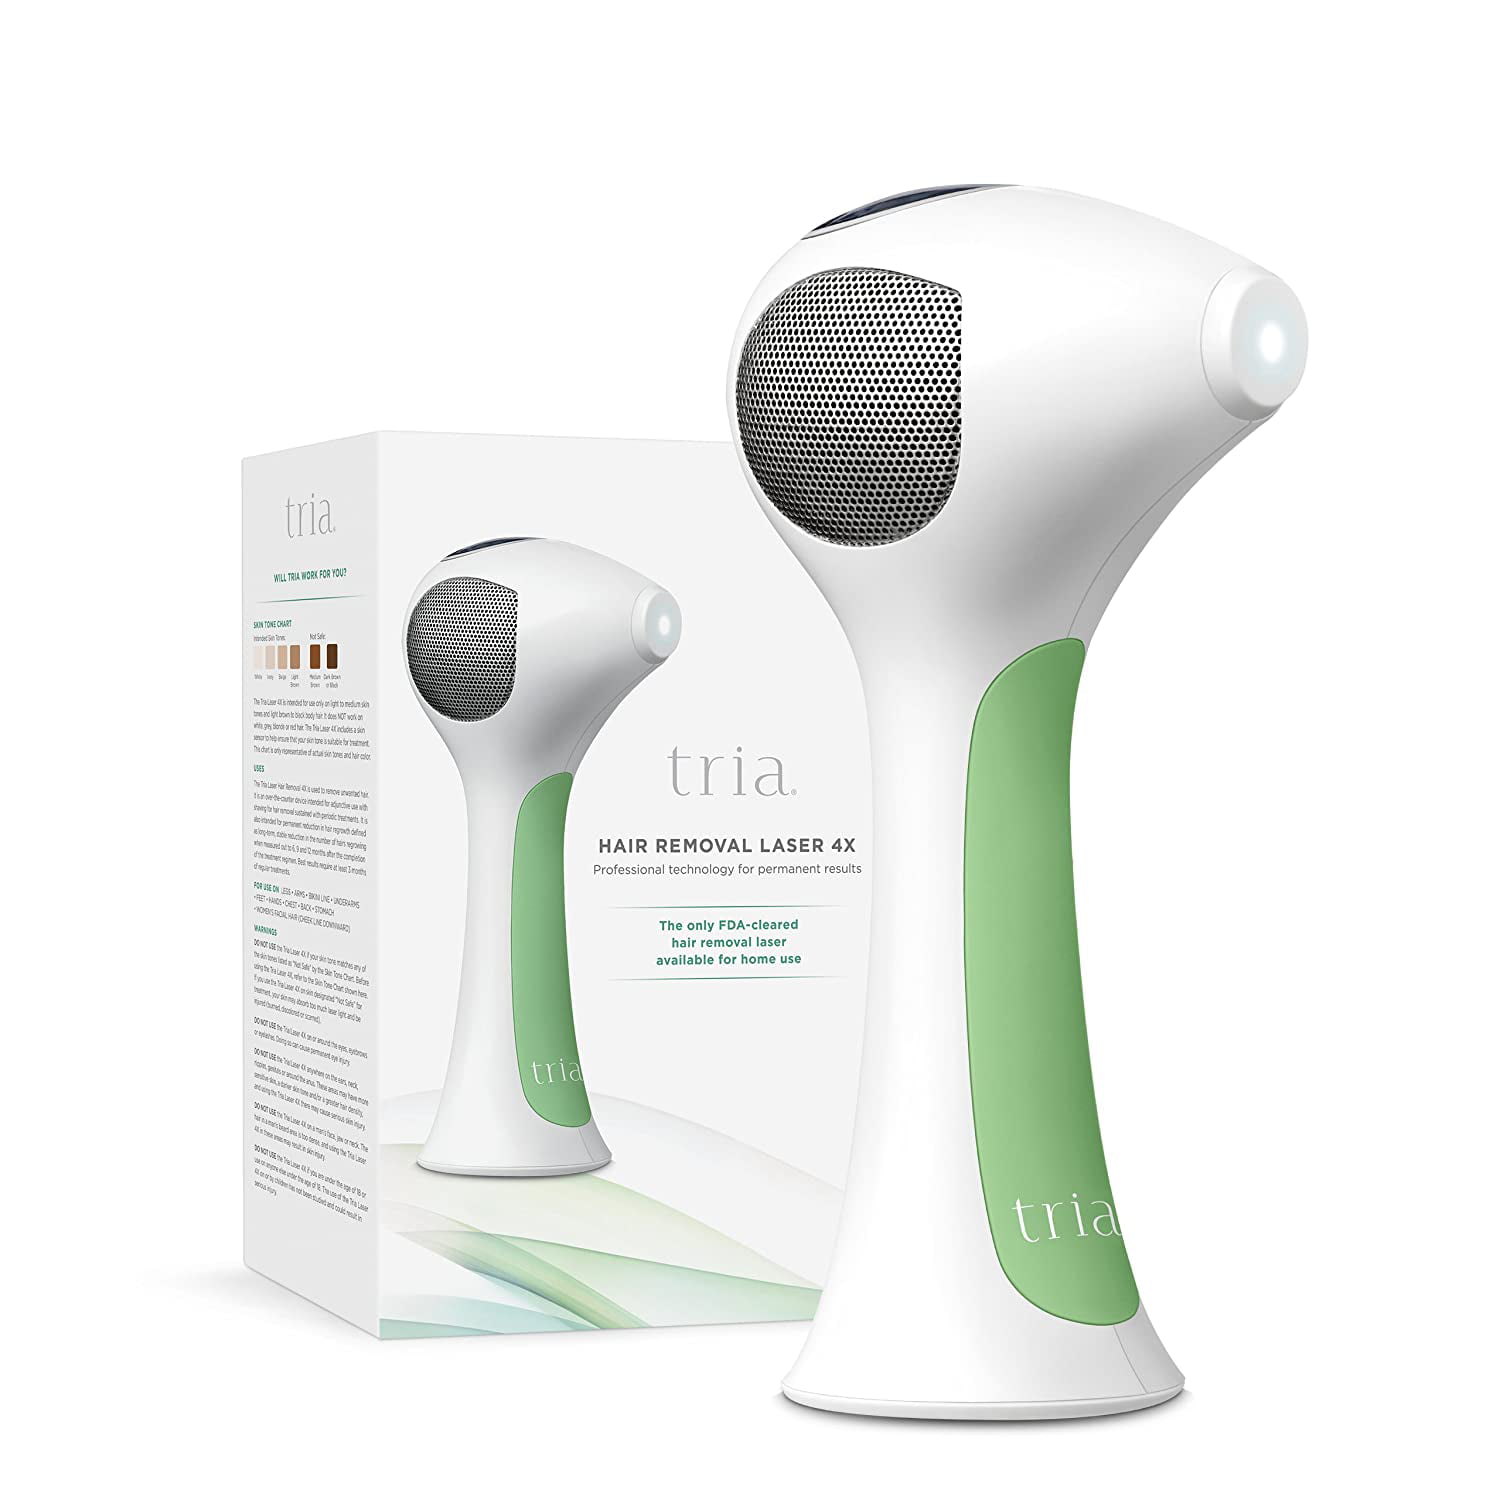 ($449 Value) Tria 4x Beauty Permanent Hair Removal Laser System FDA-Cleared  White/Green